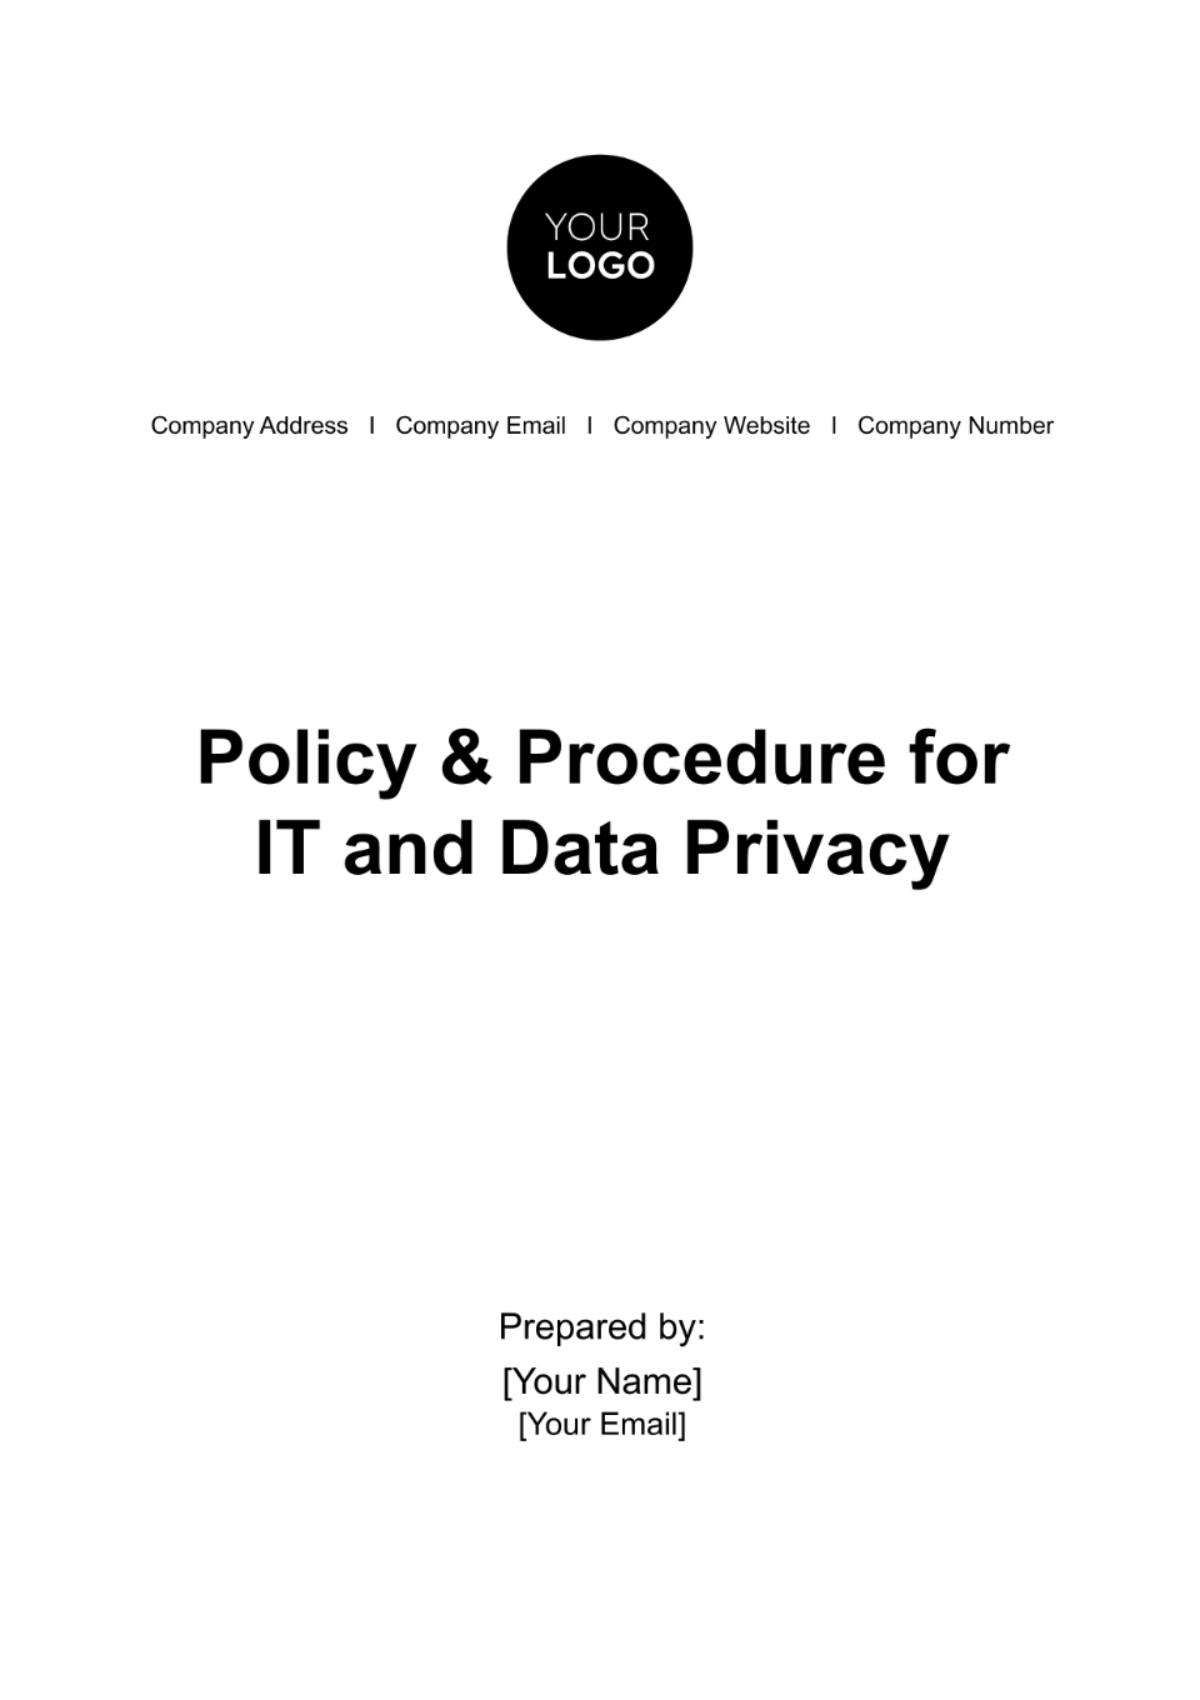 Free Policy & Procedure for IT and Data Privacy in HR Template